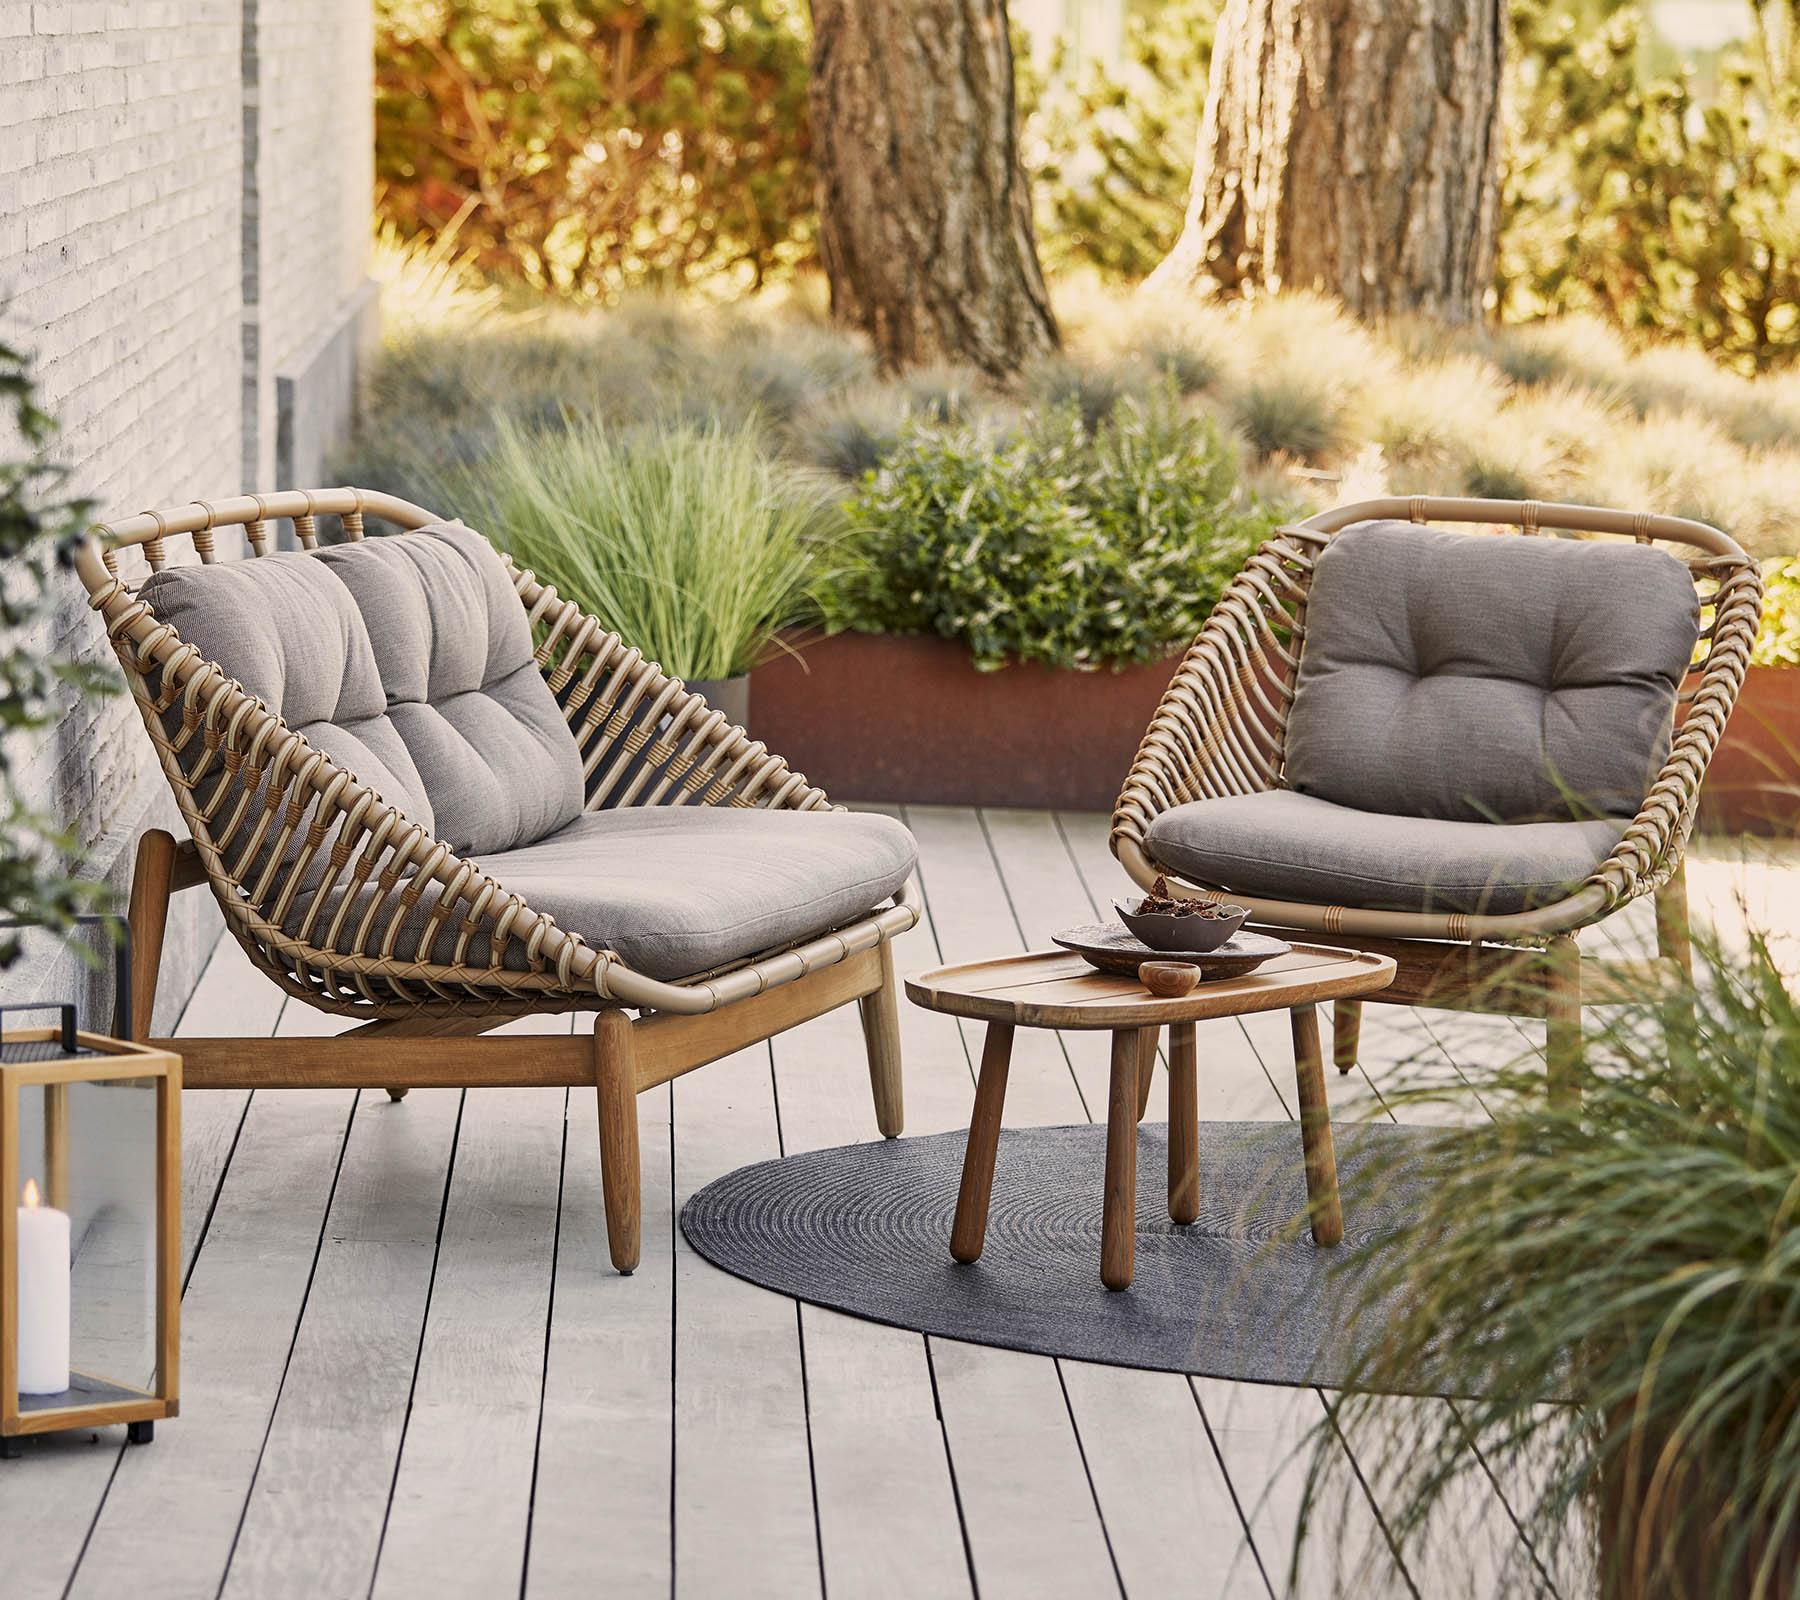 Cane-Line Denmark Outdoor Chairs String lounge chair w/teak frame, incl. Cane-line AirTouch cushions, Cane-line Weave-54020